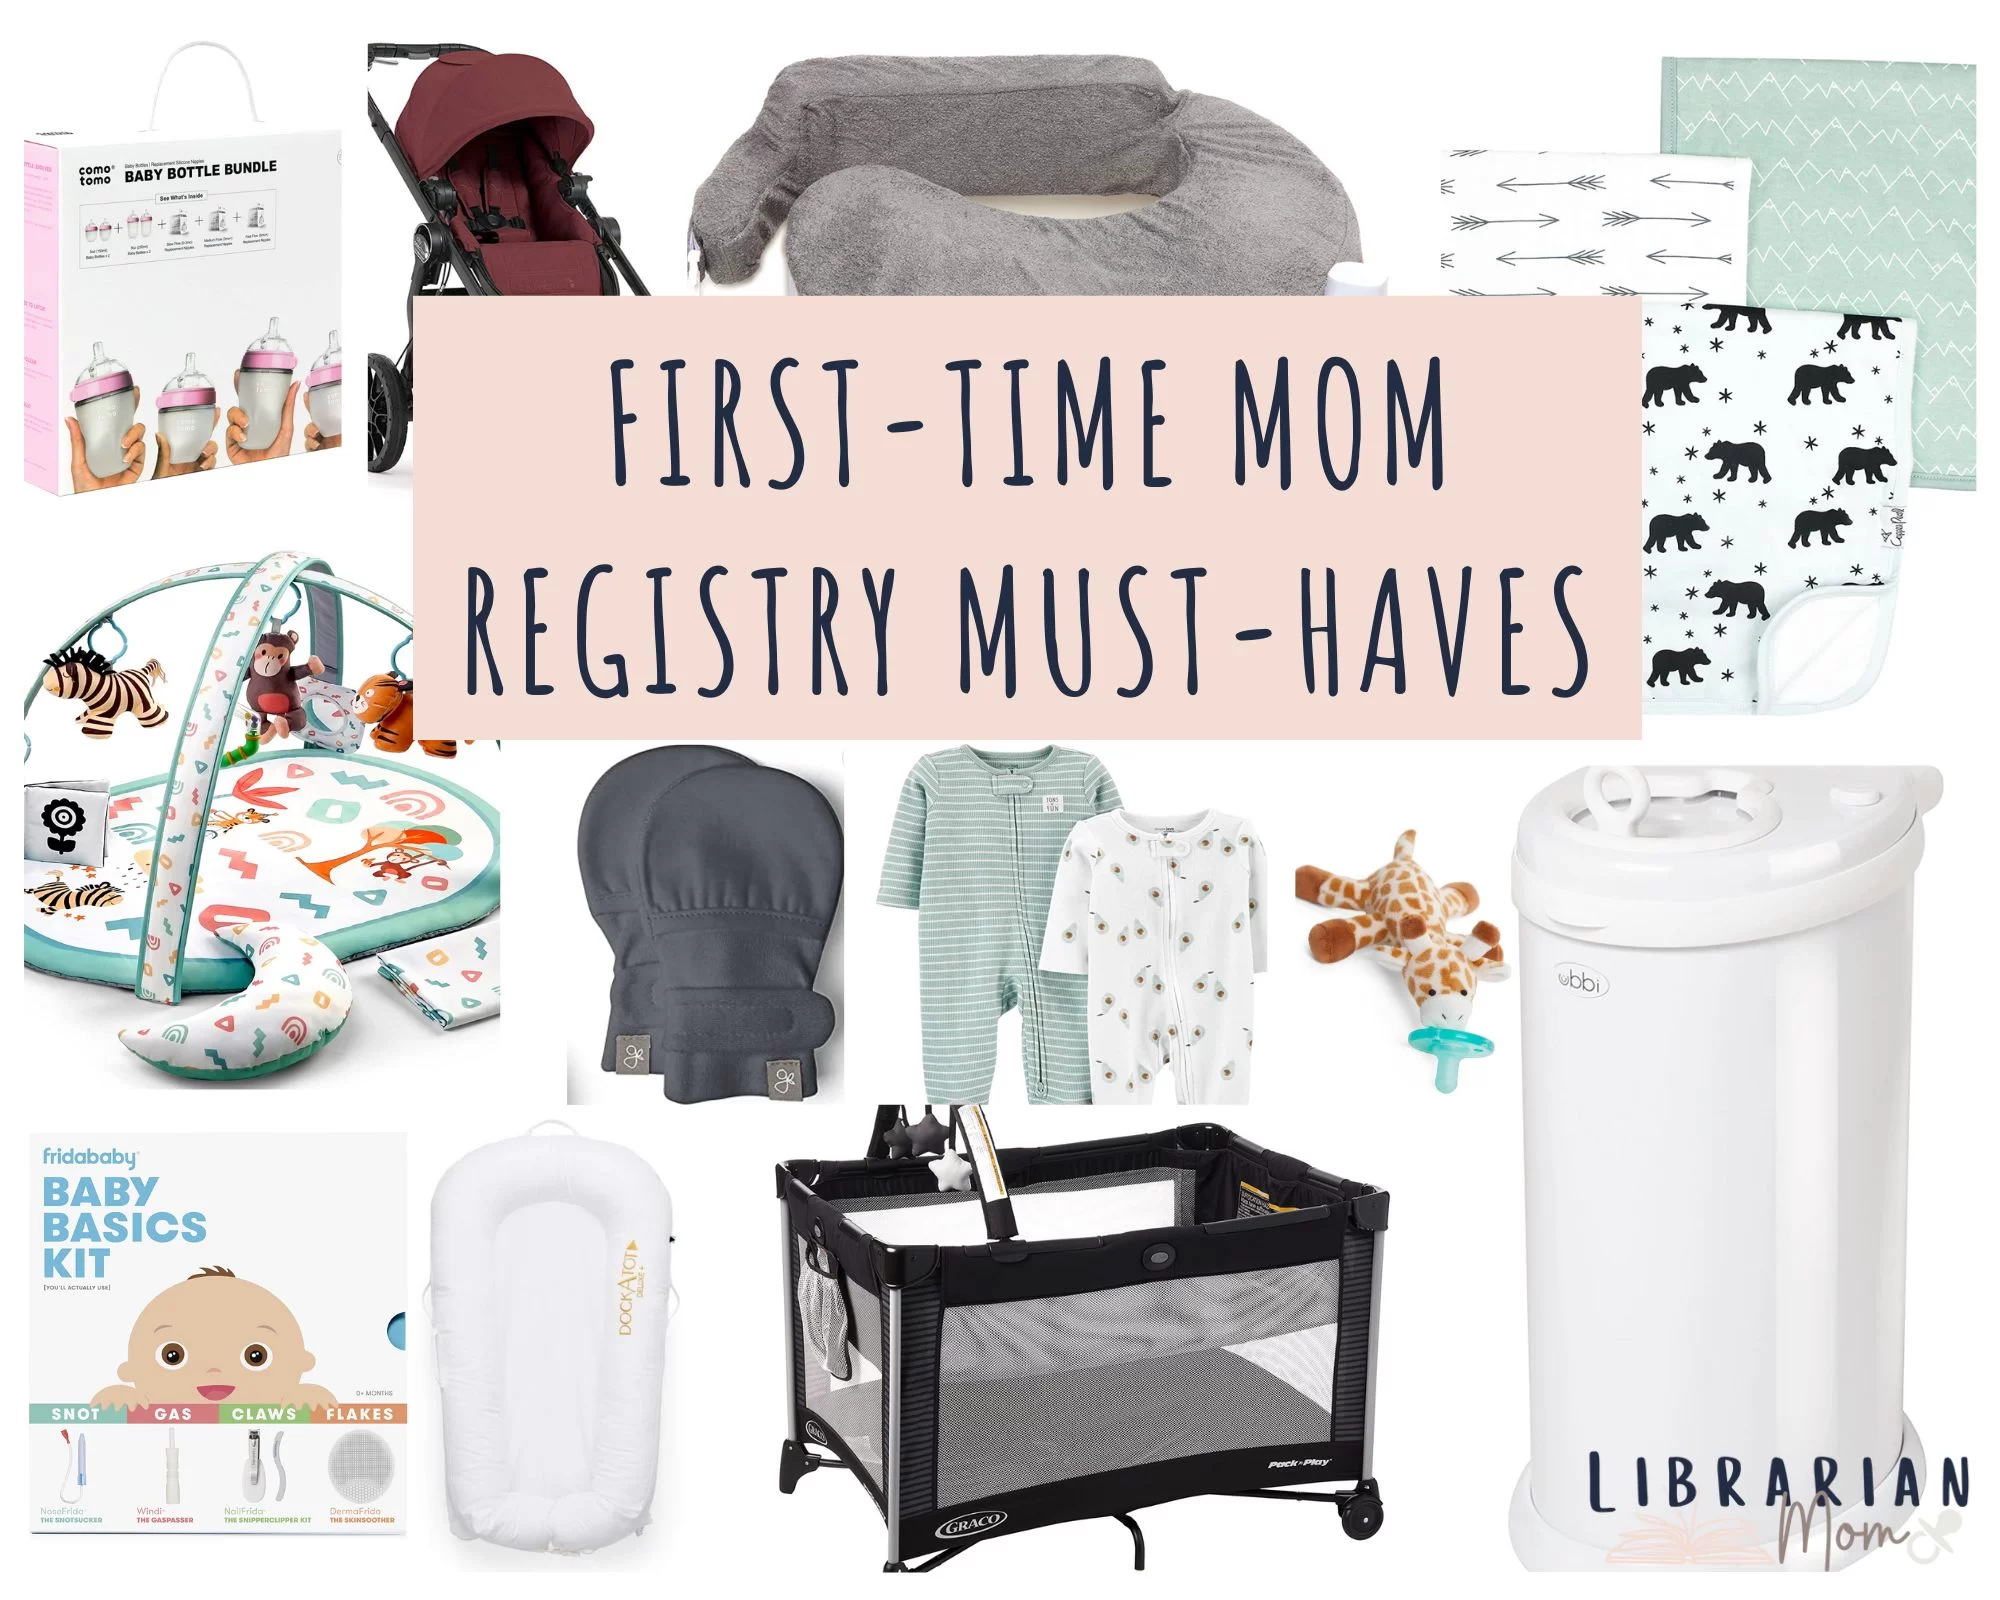 collage of baby items with text "first-time mom registry must-haves"